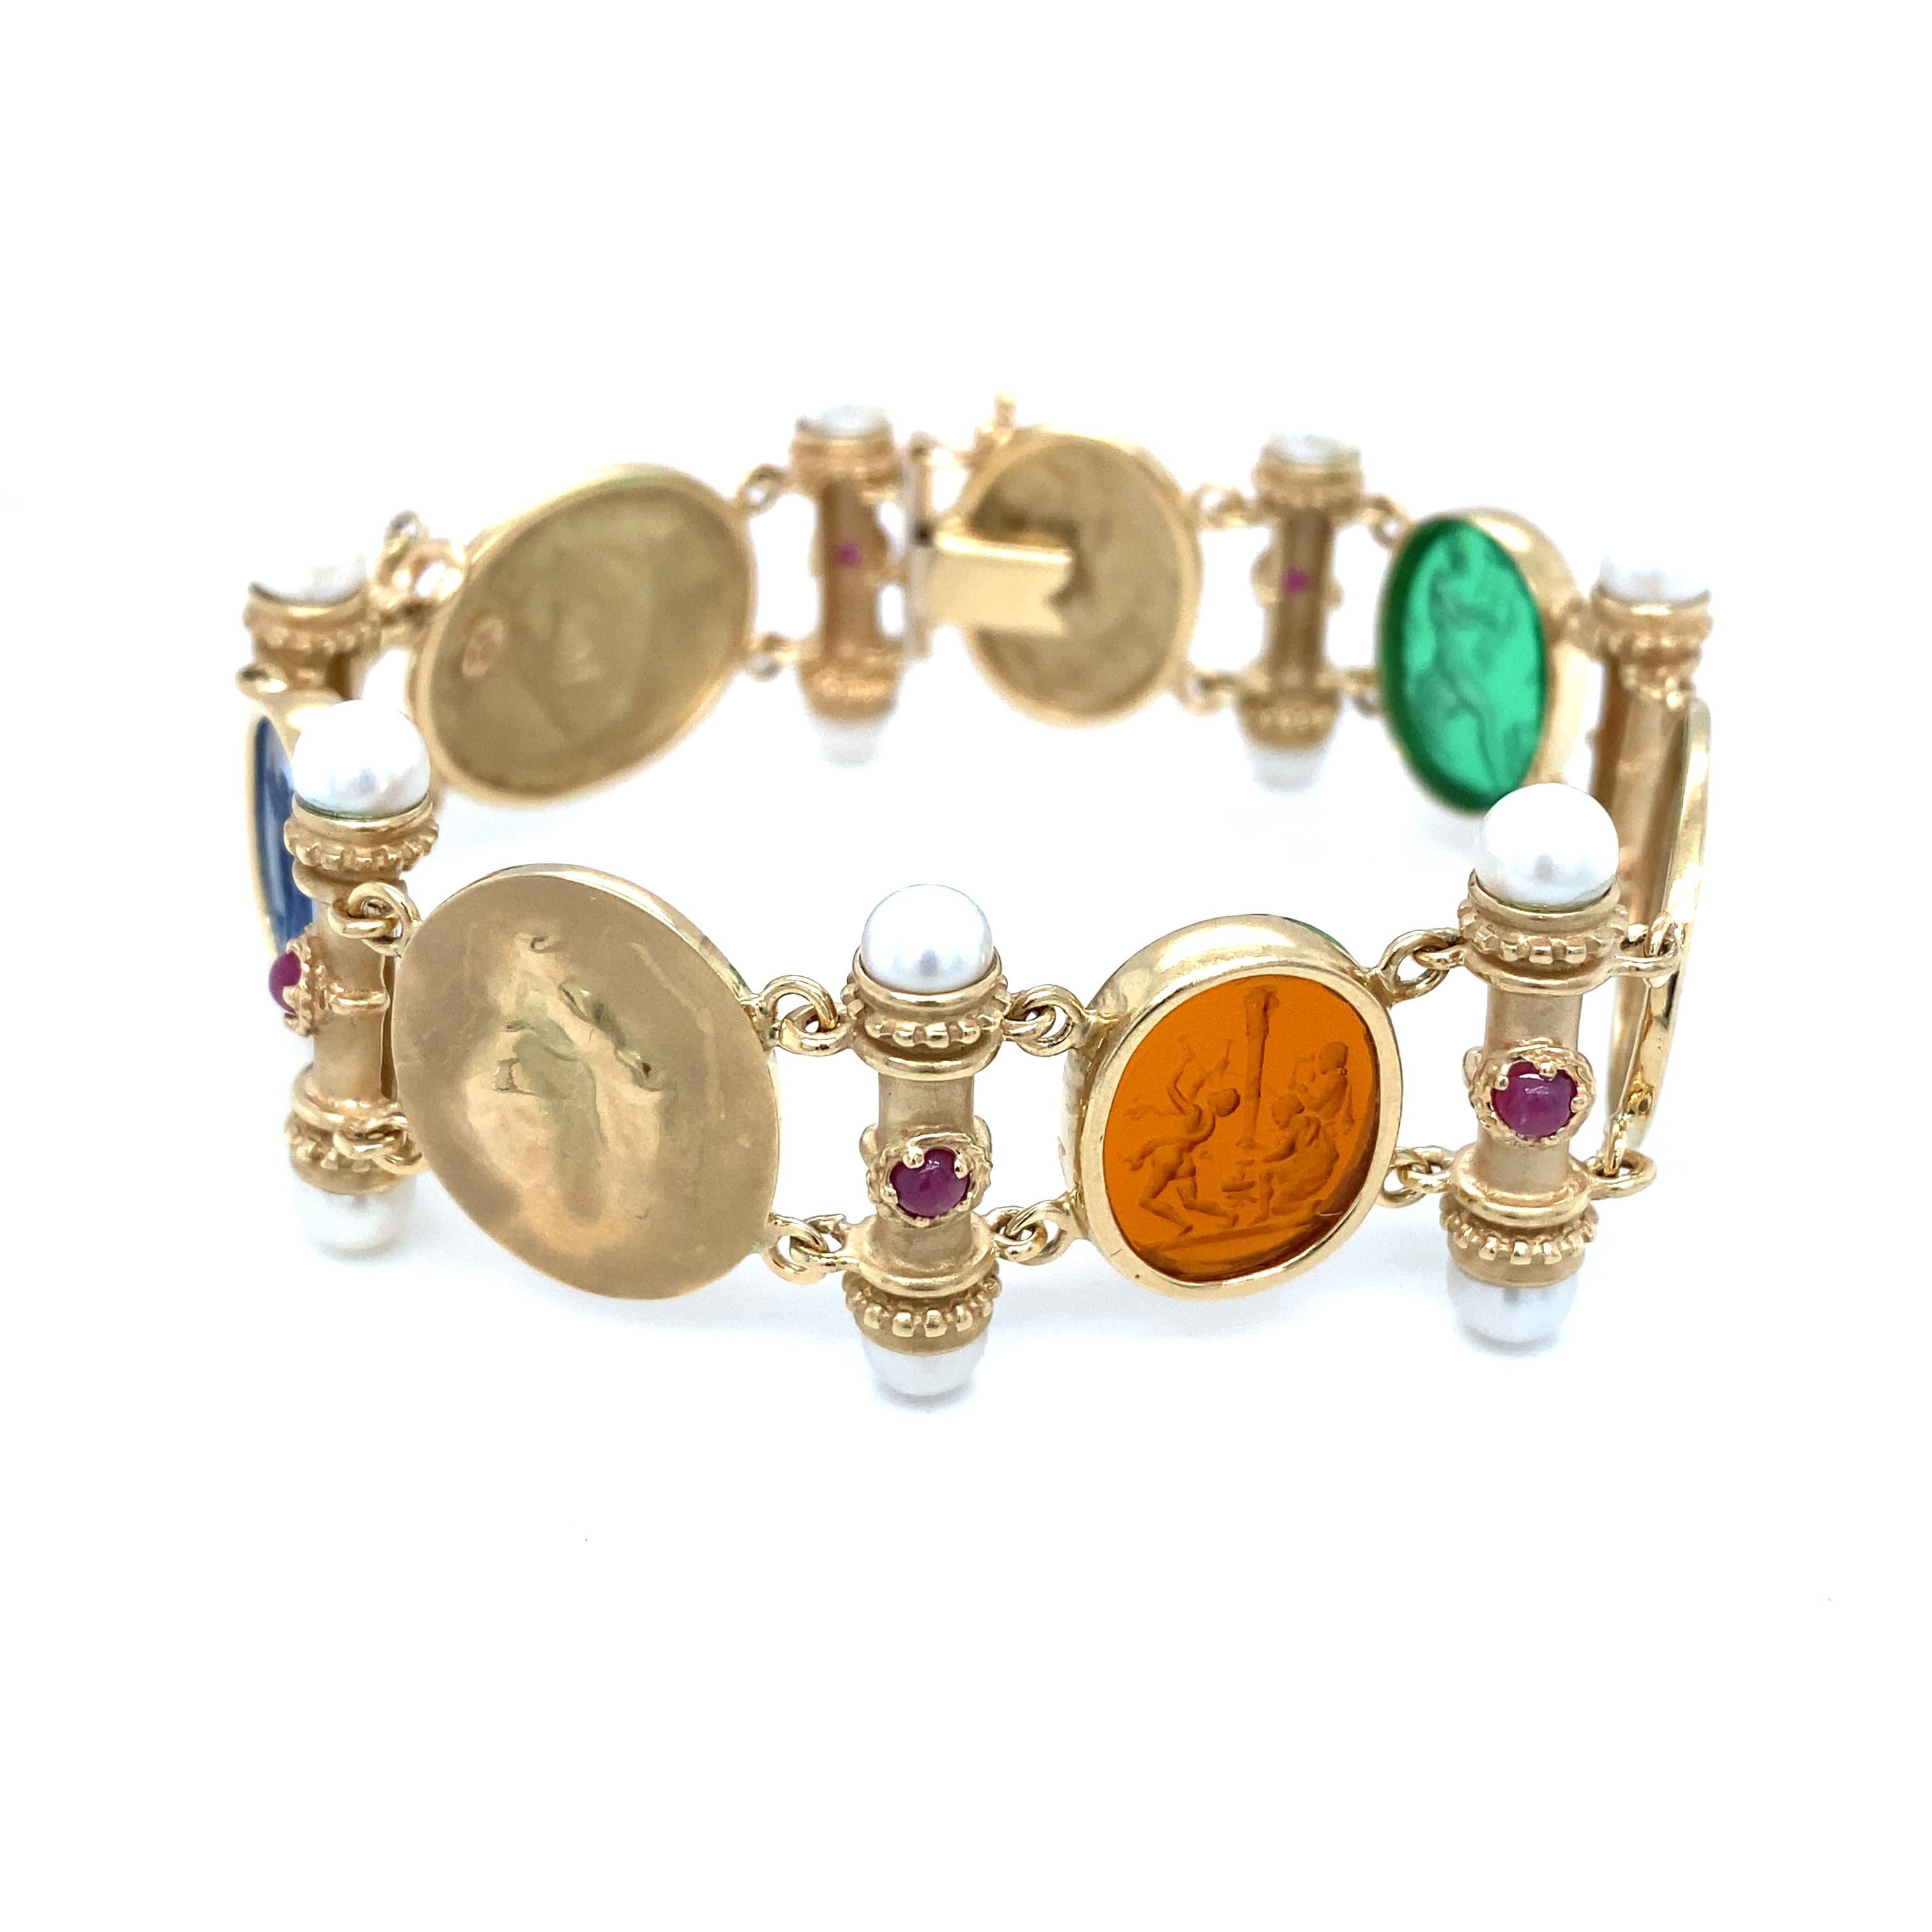 Item Details: This spectacular bracelet is a gorgeous piece from Italy. Complete with glass intaglios, pearls, and rubies, this bracelet is a beautiful statement piece. The intaglios feature scenes from Roman mythology, and the oval links between